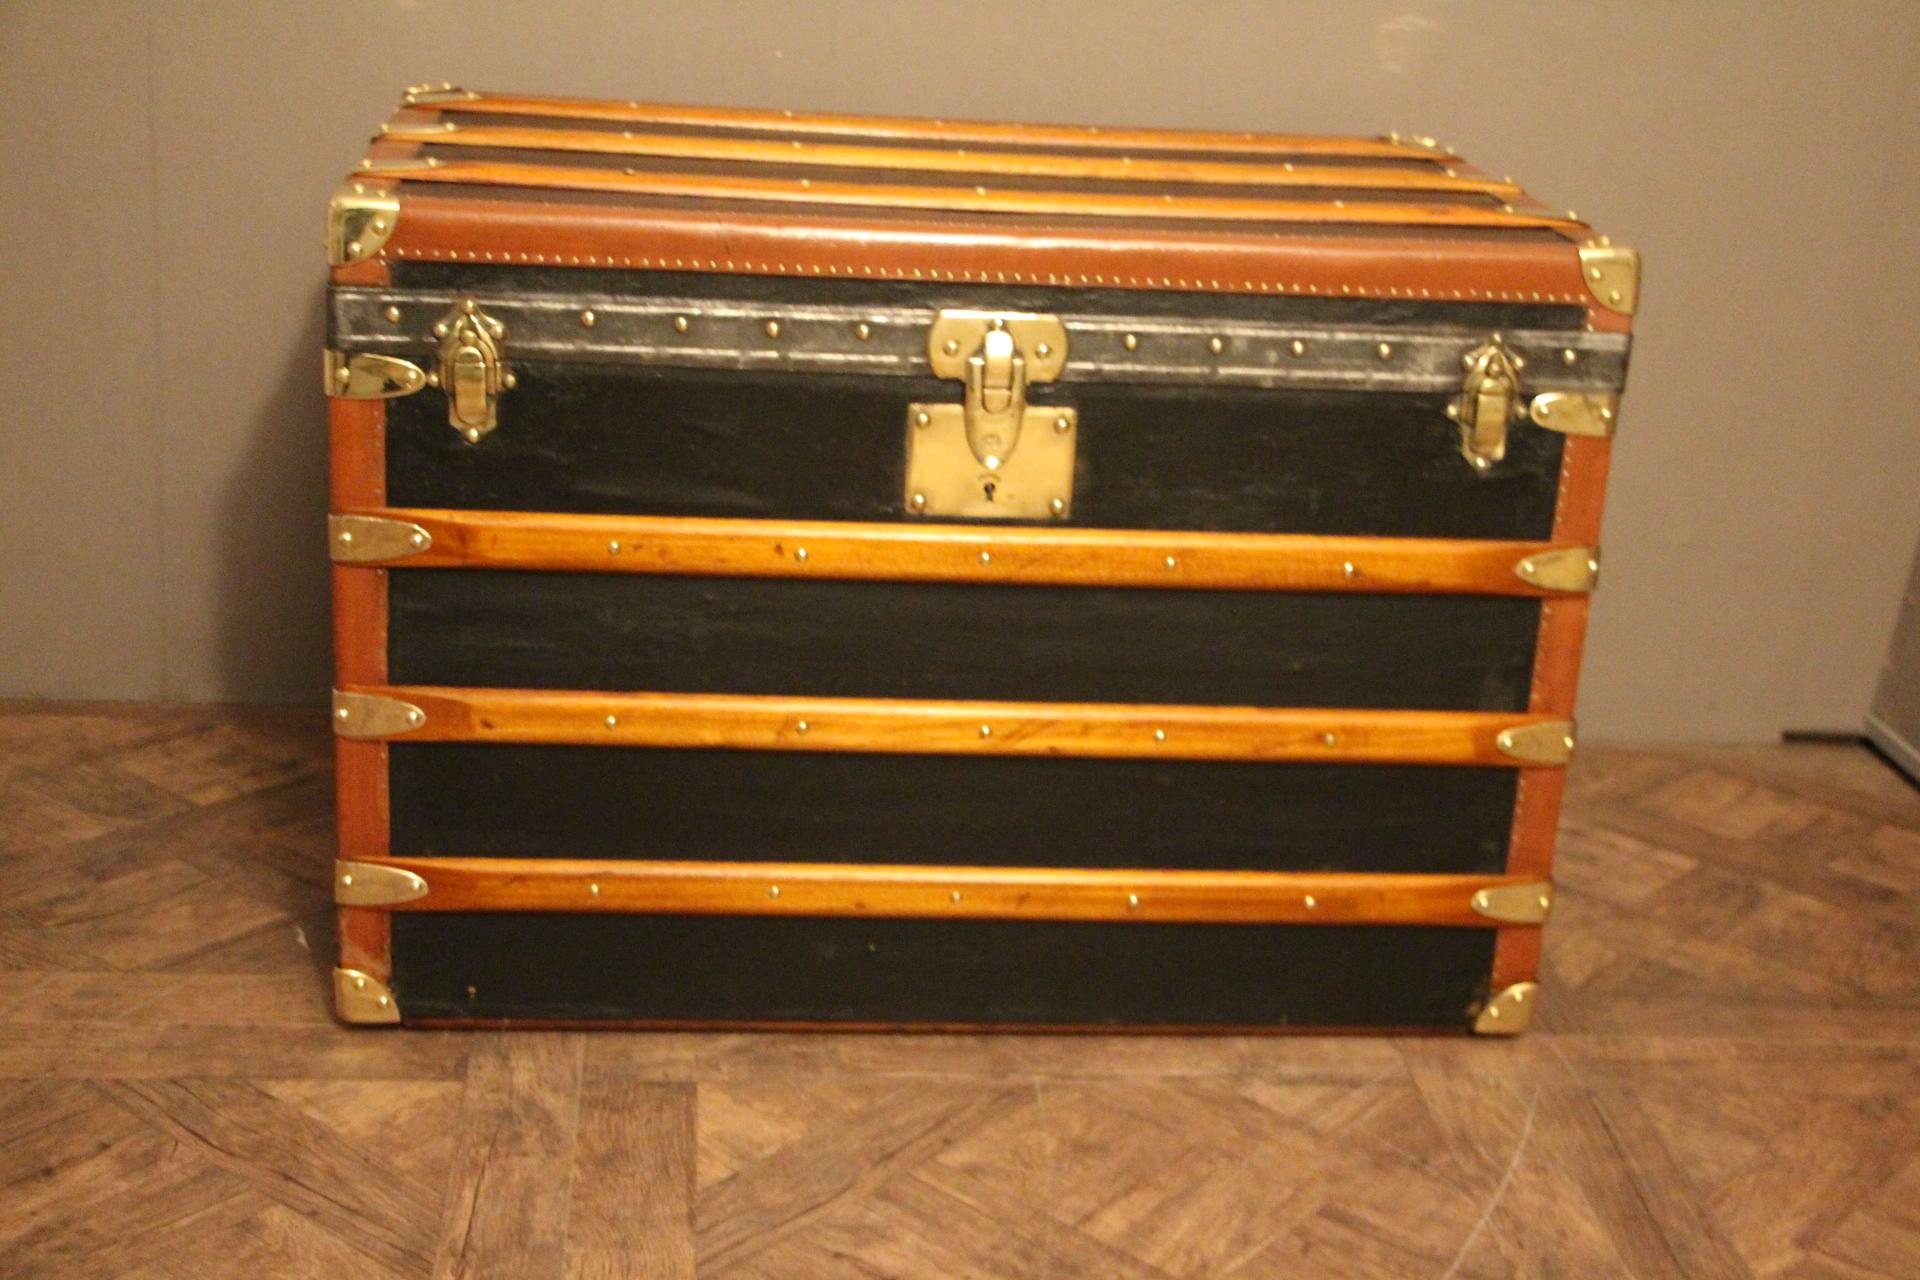 This nice steamer trunk features black canvas, honey color lozine trim, large leather side handles and brass corners and locks.
Yellow and blue stripes of customization on the sides..
Its main lock as well as its handle latches are marked 